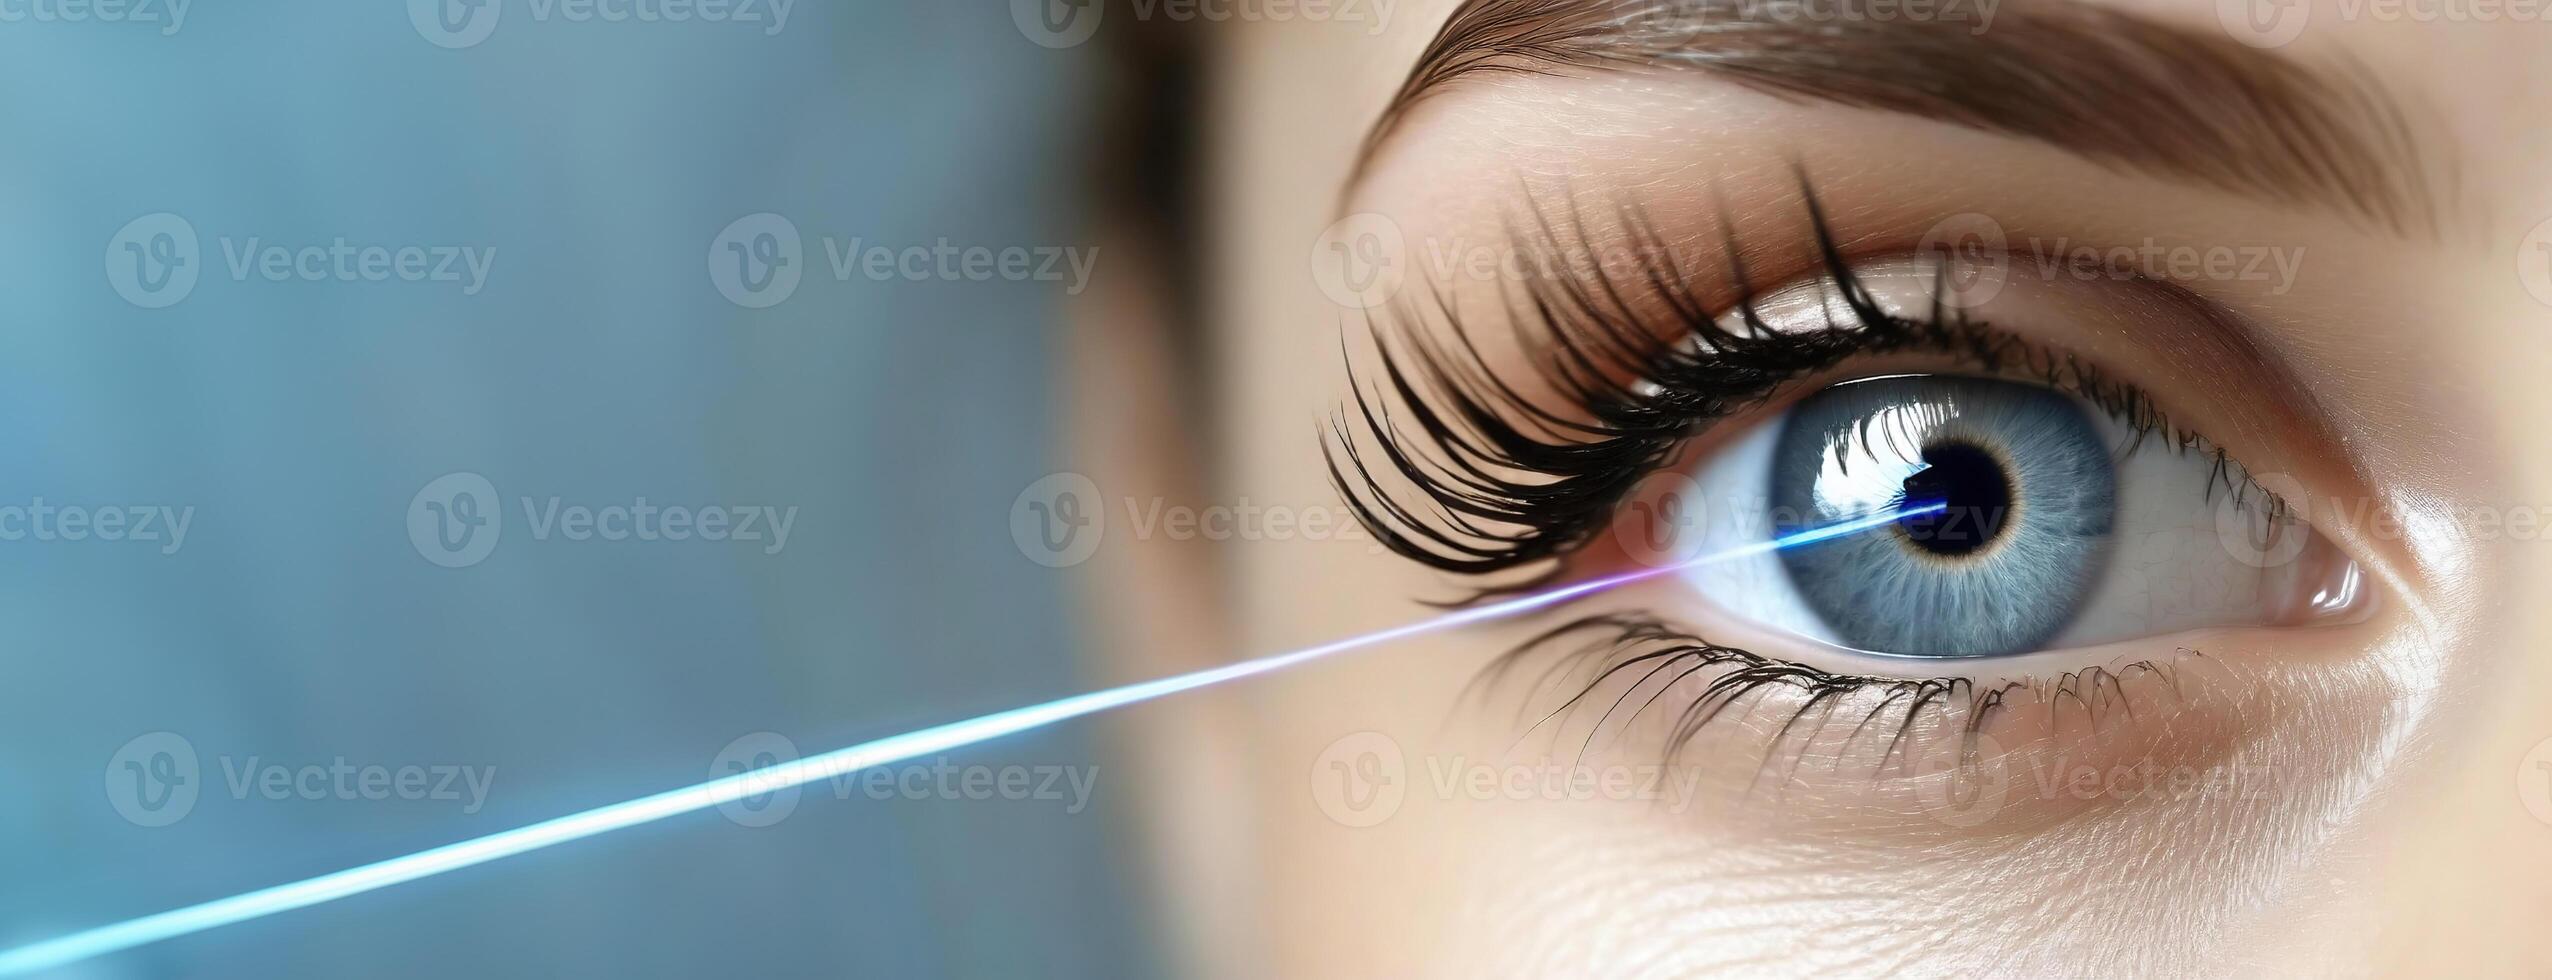 AI Generated Precision medicine in ophthalmology, laser eye surgery or a detailed retina scan. A close-up of a human eye with a blue laser beam passing through it, highlighting advanced vision photo